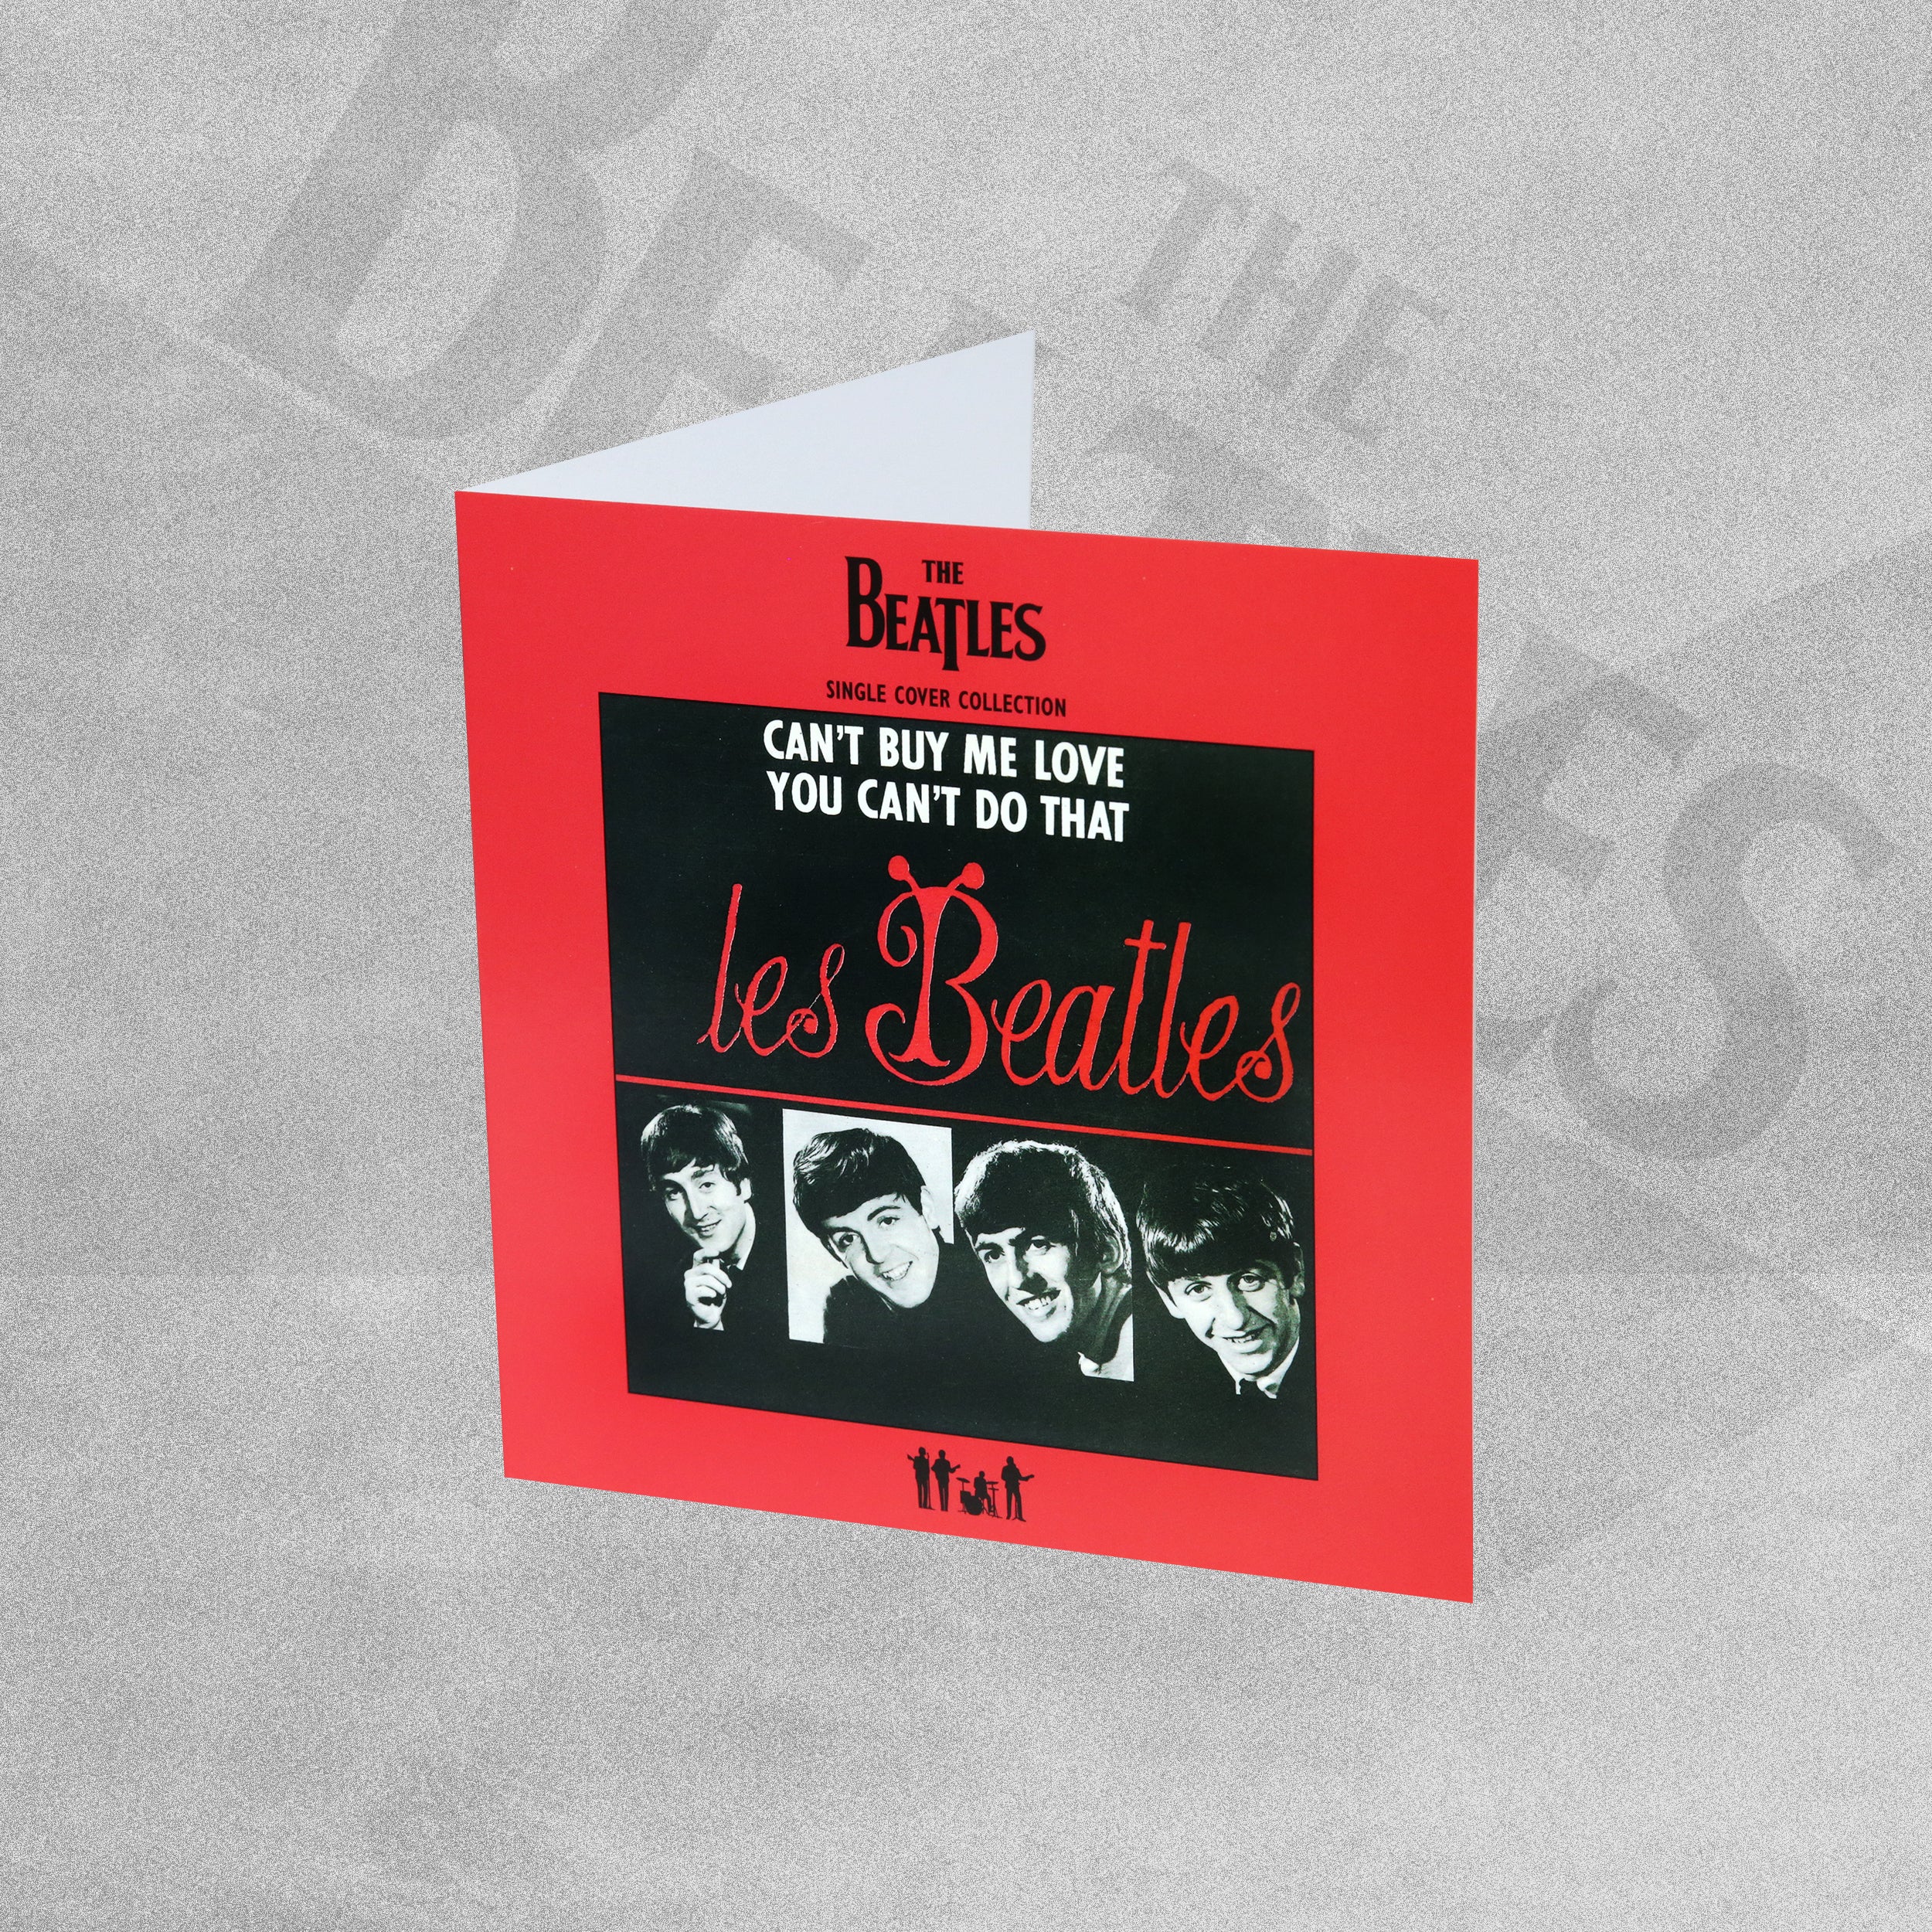 The Beatles Single Cover Collection Greeting Card - Can't Buy Me Love